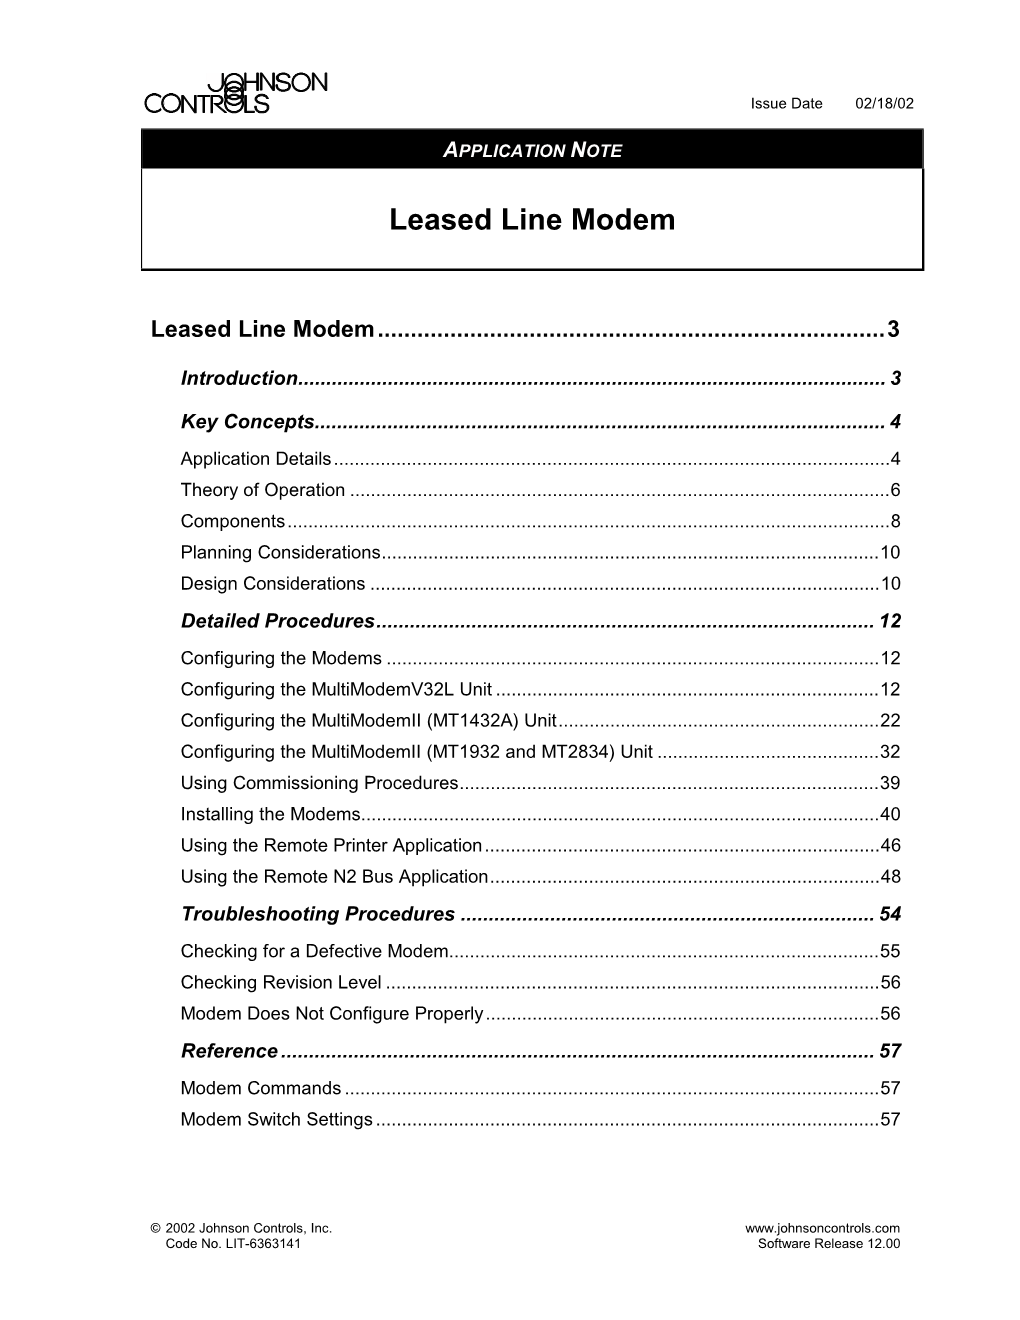 Leased Line Modem Application Note